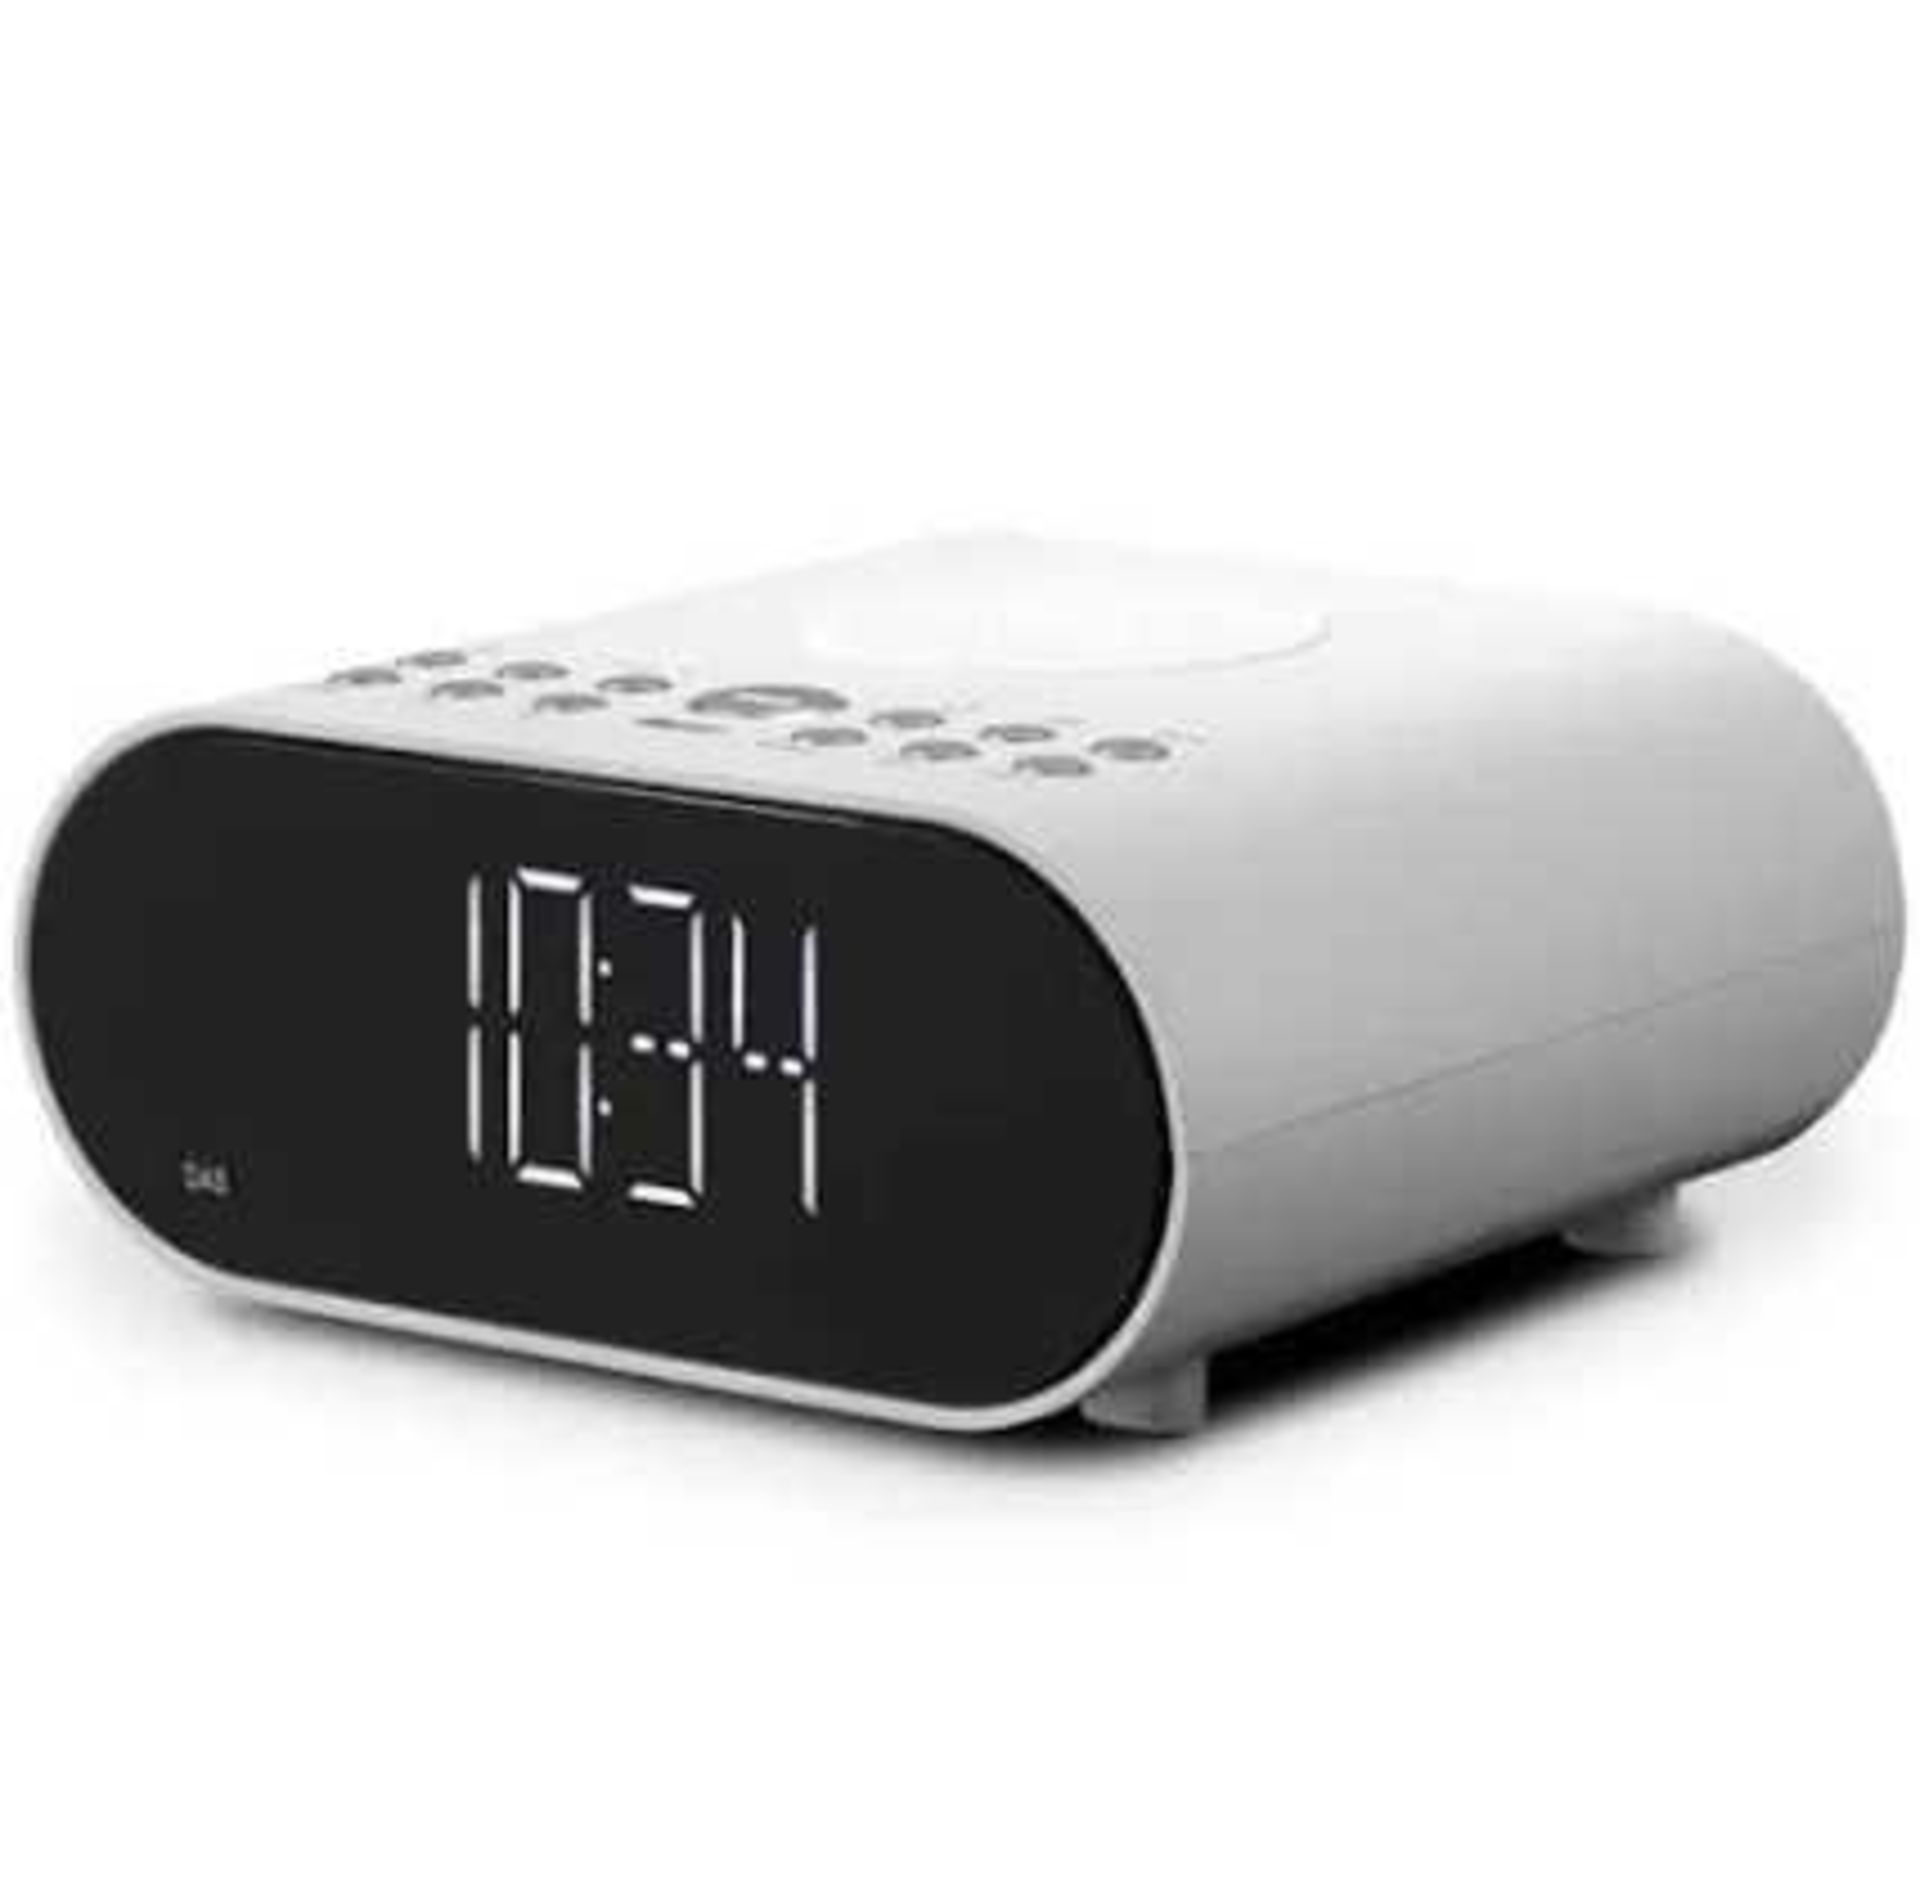 RRP £180 Lot To Contain 2 Unboxed Roberts Ortus Dab Charge Wireless Charging Alarm Clock Radios